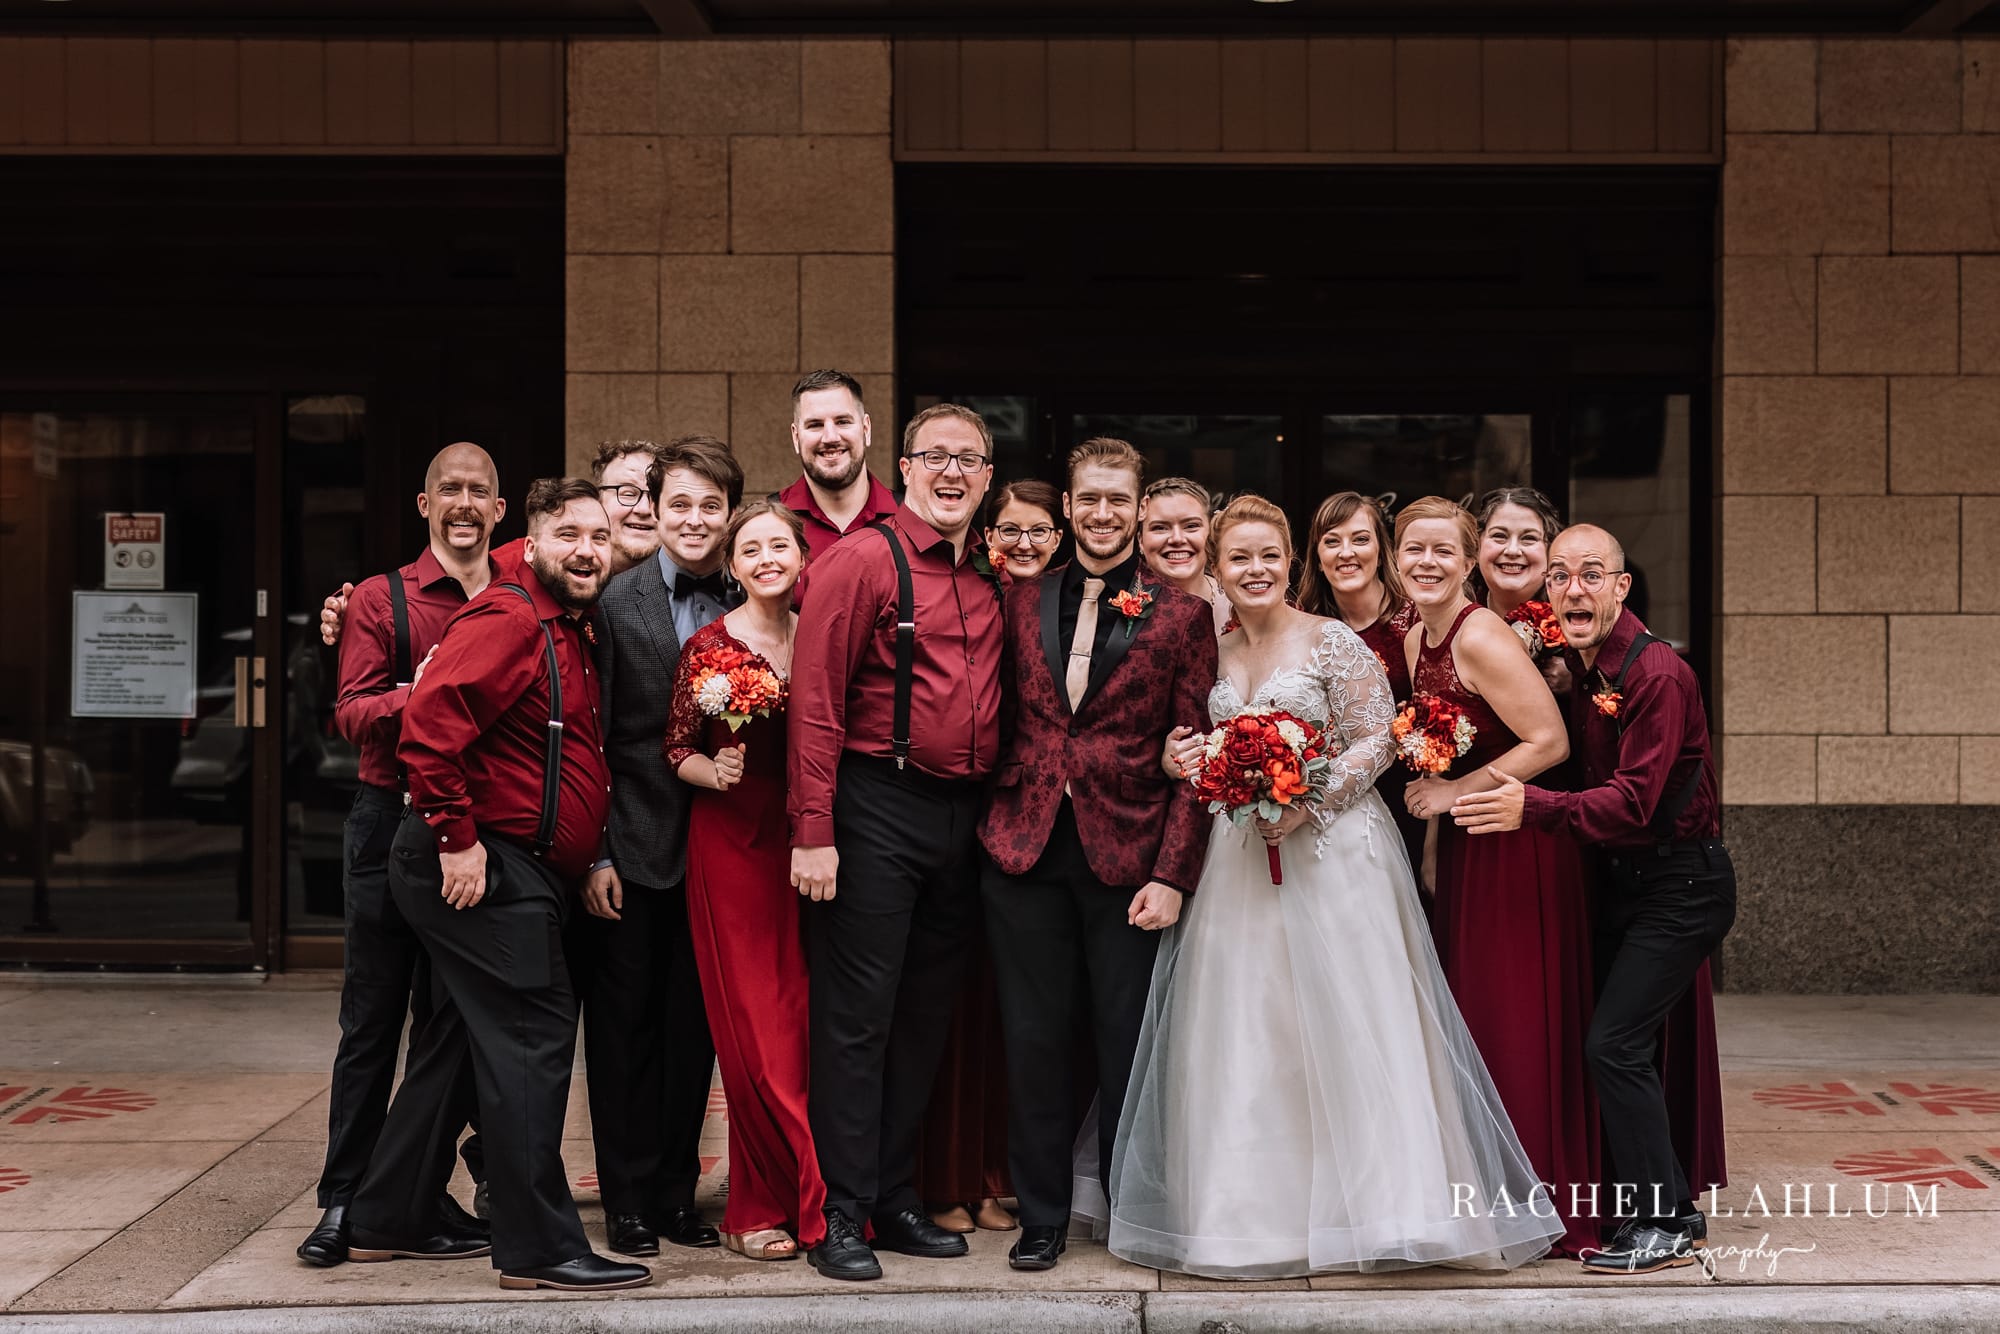 Wedding party gathers for a group photo outside on the streets of Duluth, Minnesota.